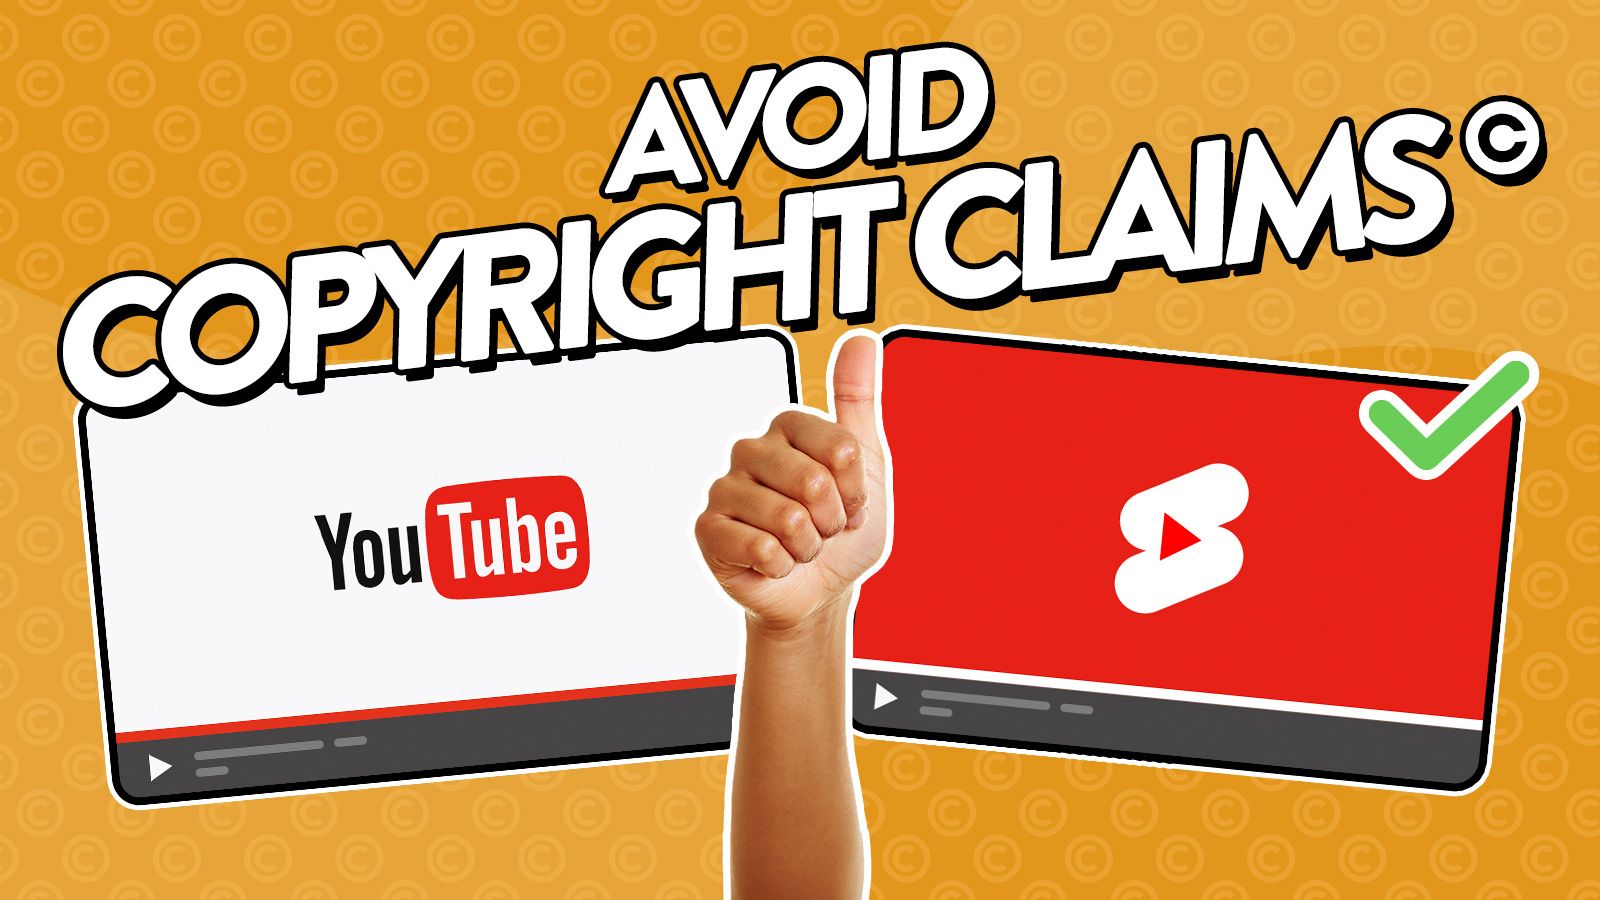 How to Avoid Copyright Claims on YouTube?